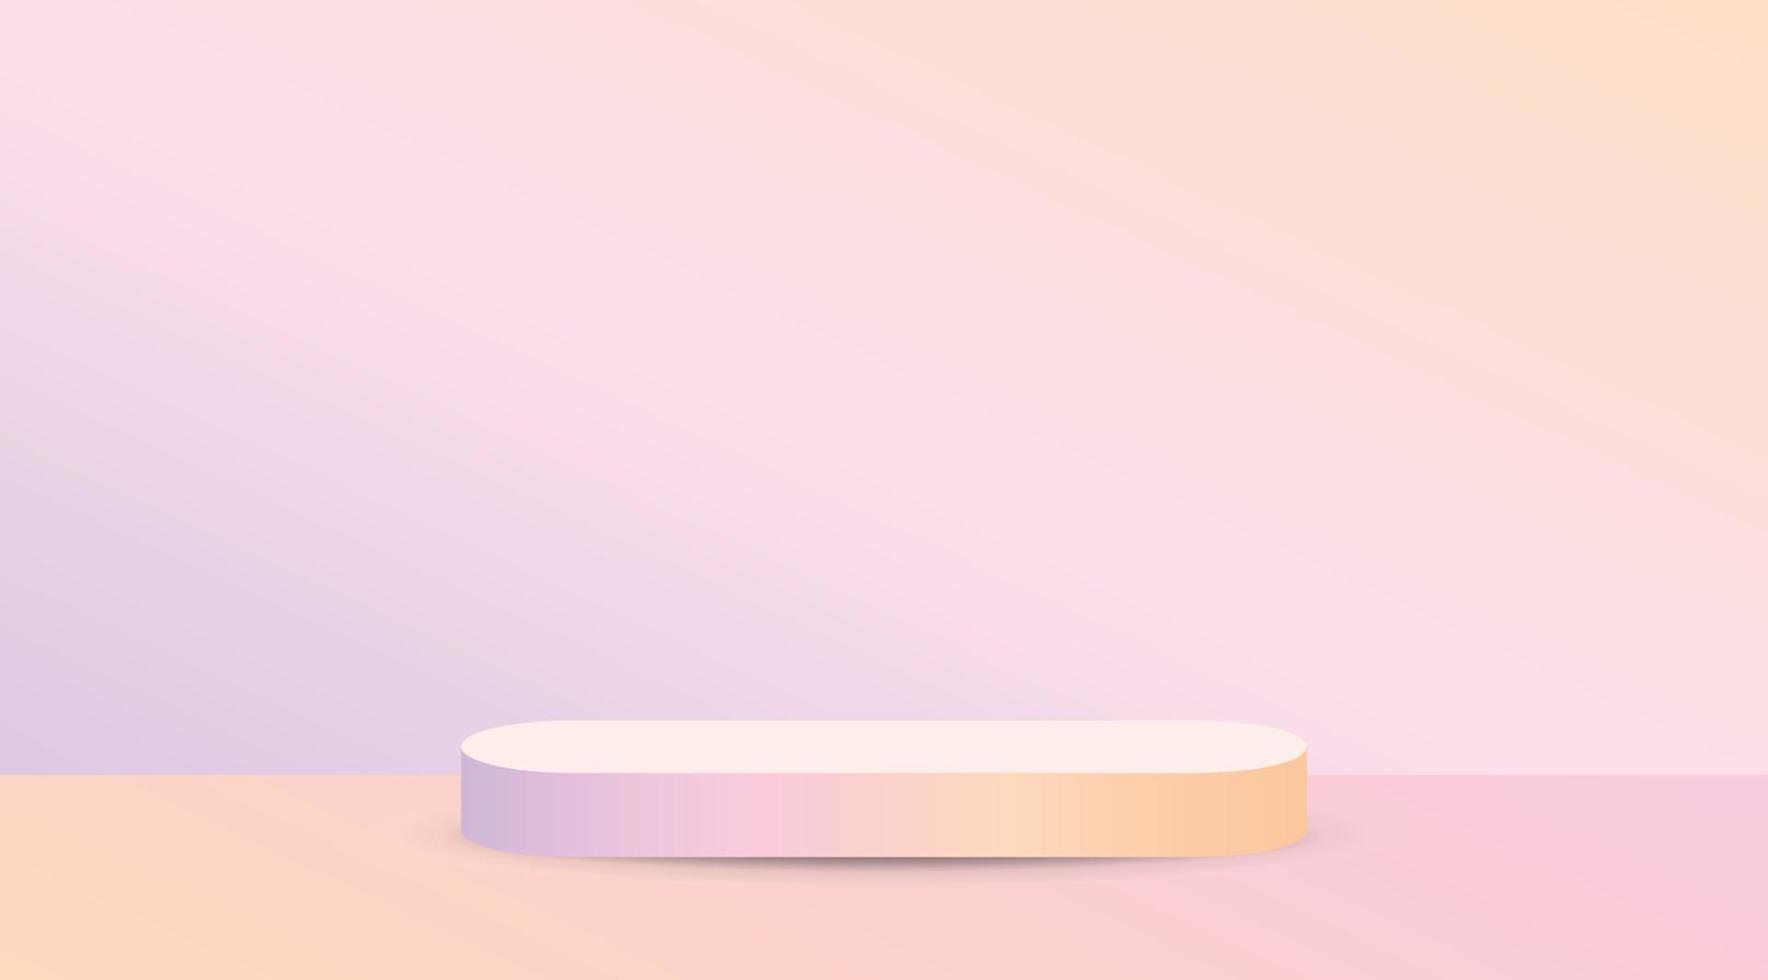 trendy gradient color product podium display 3d illustration vector on sweet pastel wall and floor background for putting your object